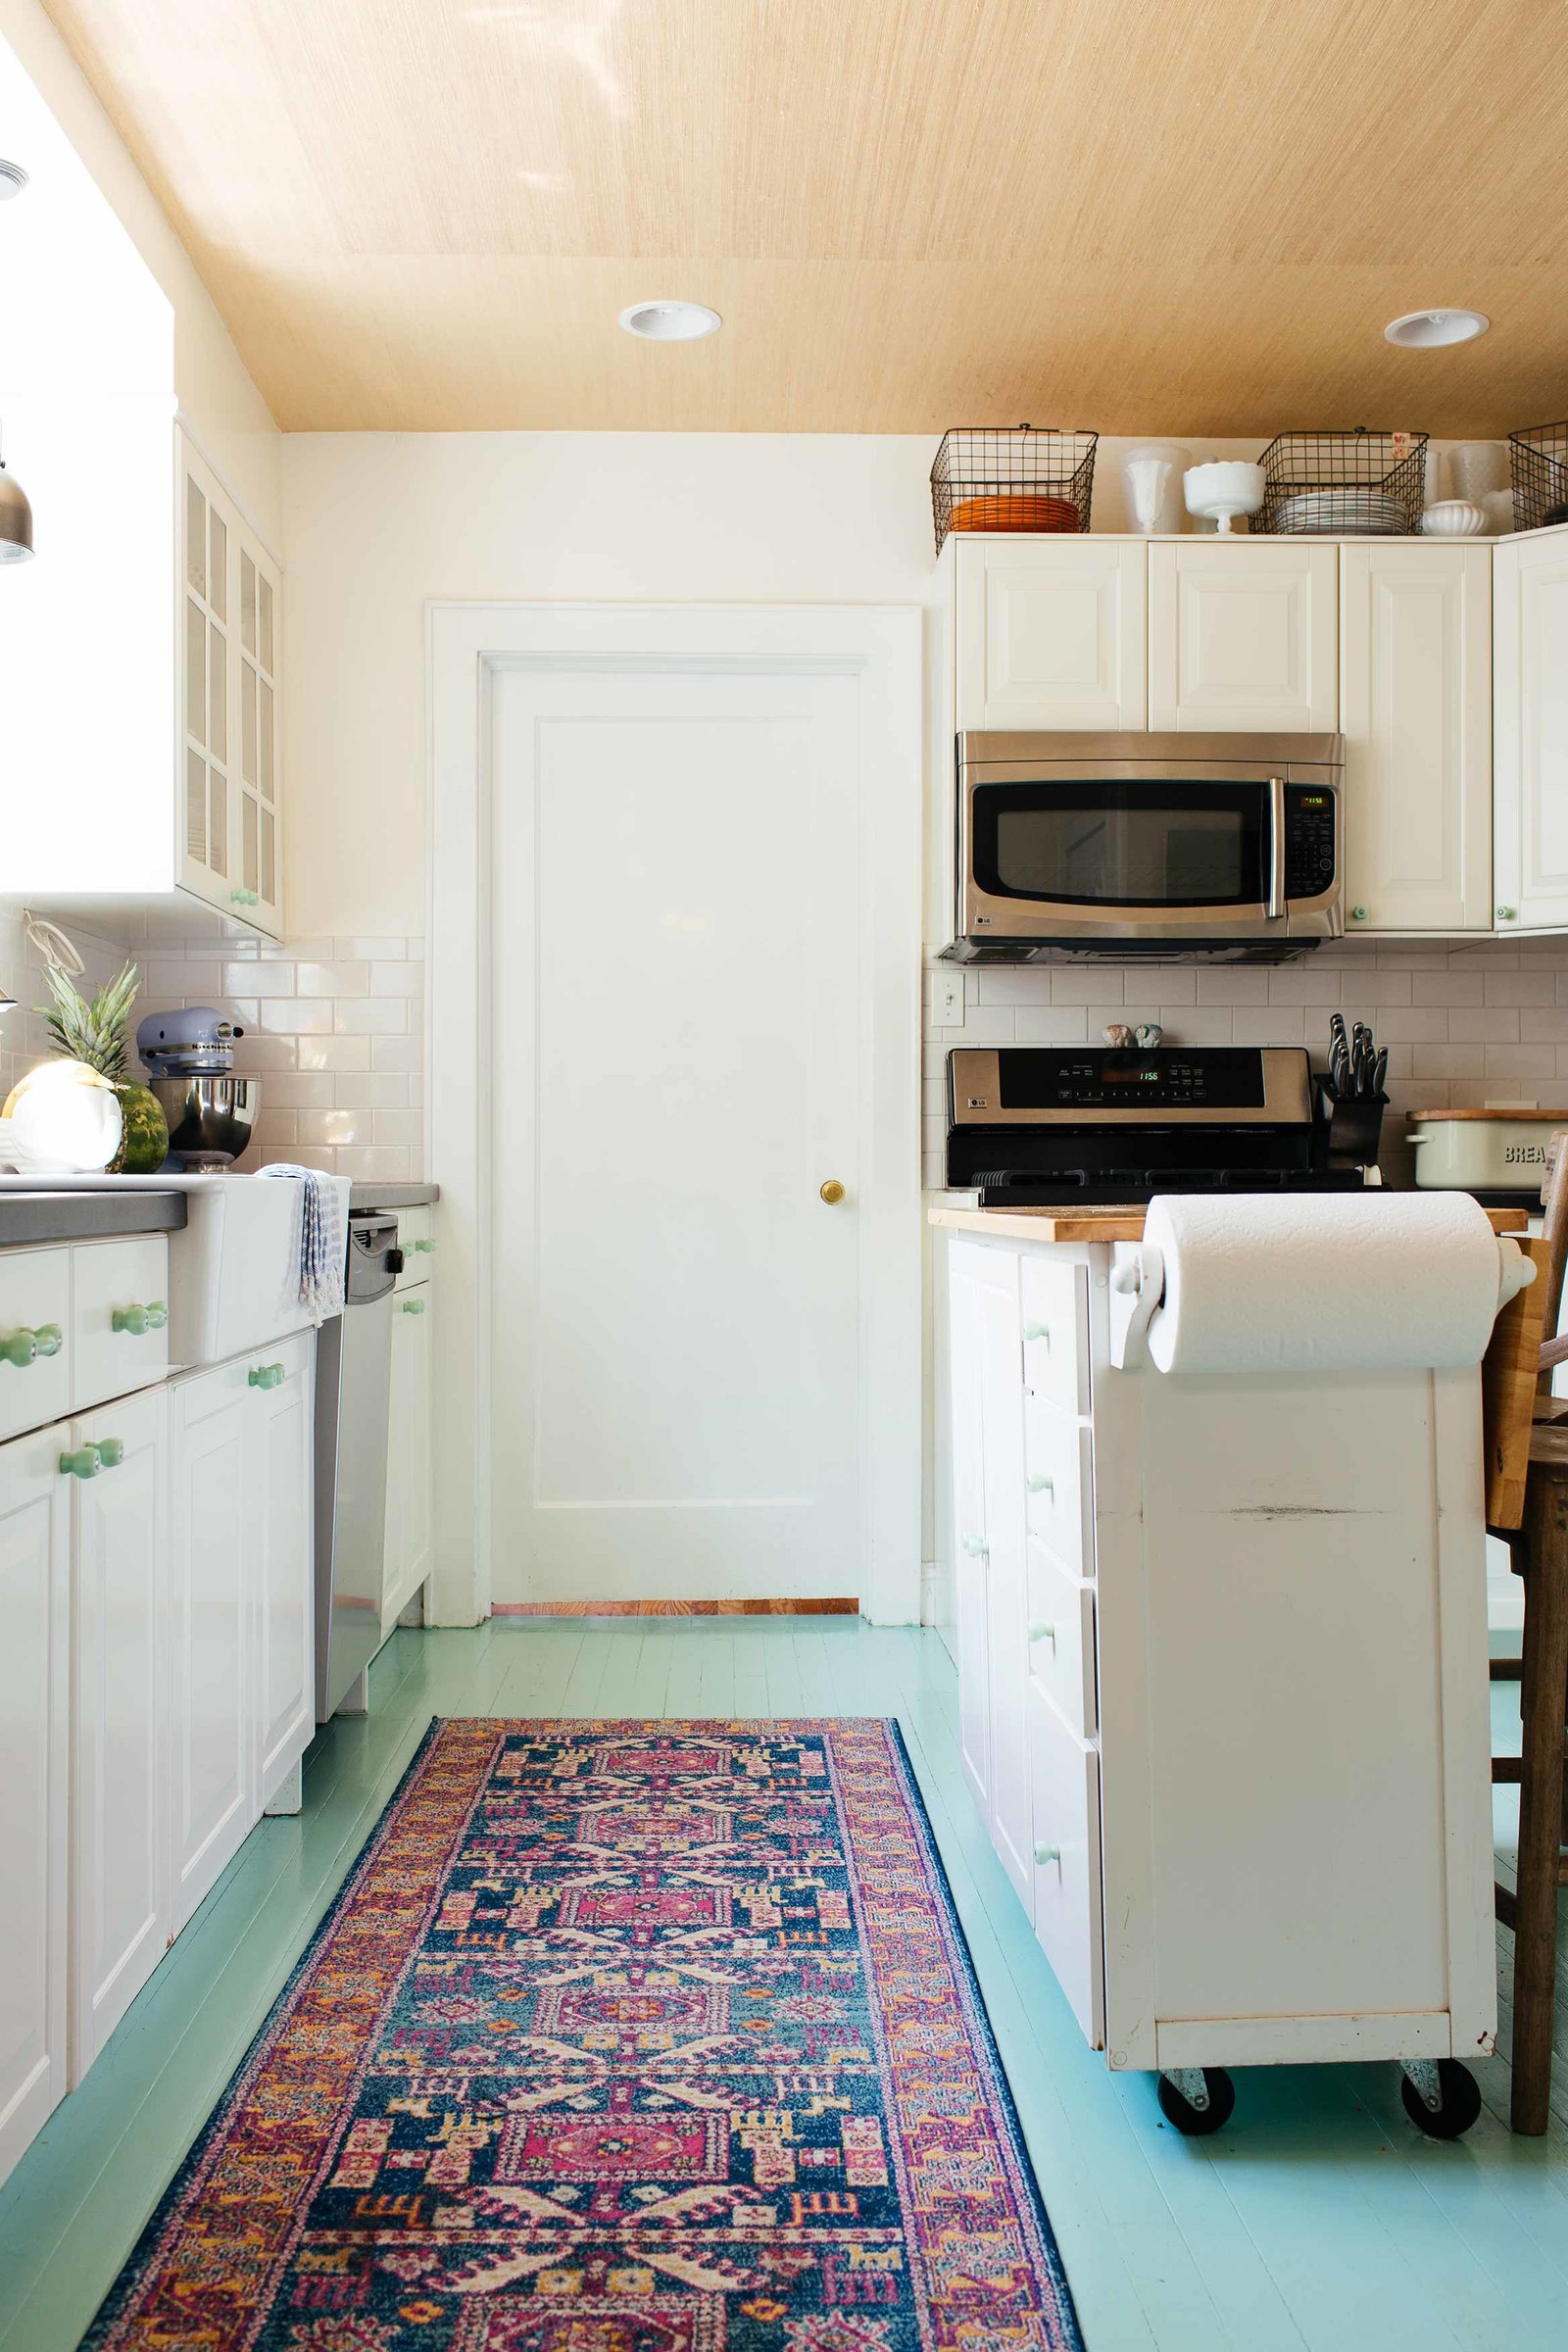 A small kitchen with mint floors and white cabinets.